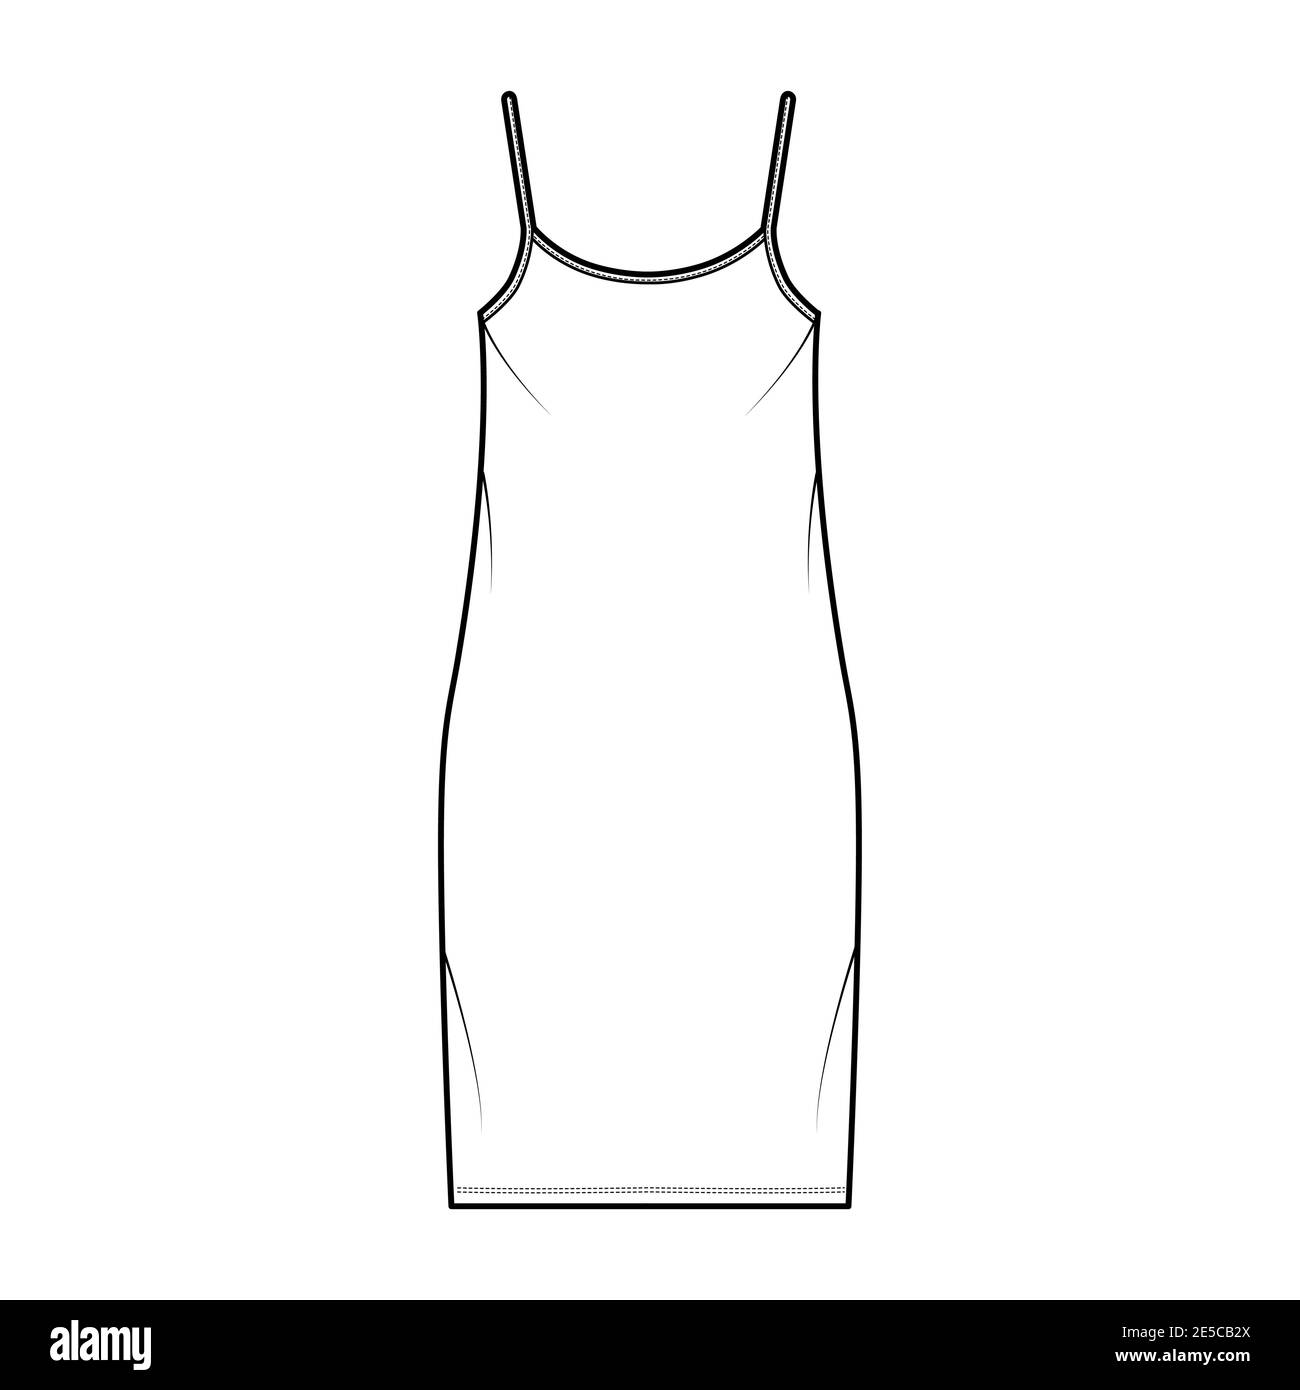 Camisole dress technical fashion illustration with scoop neck, straps ...